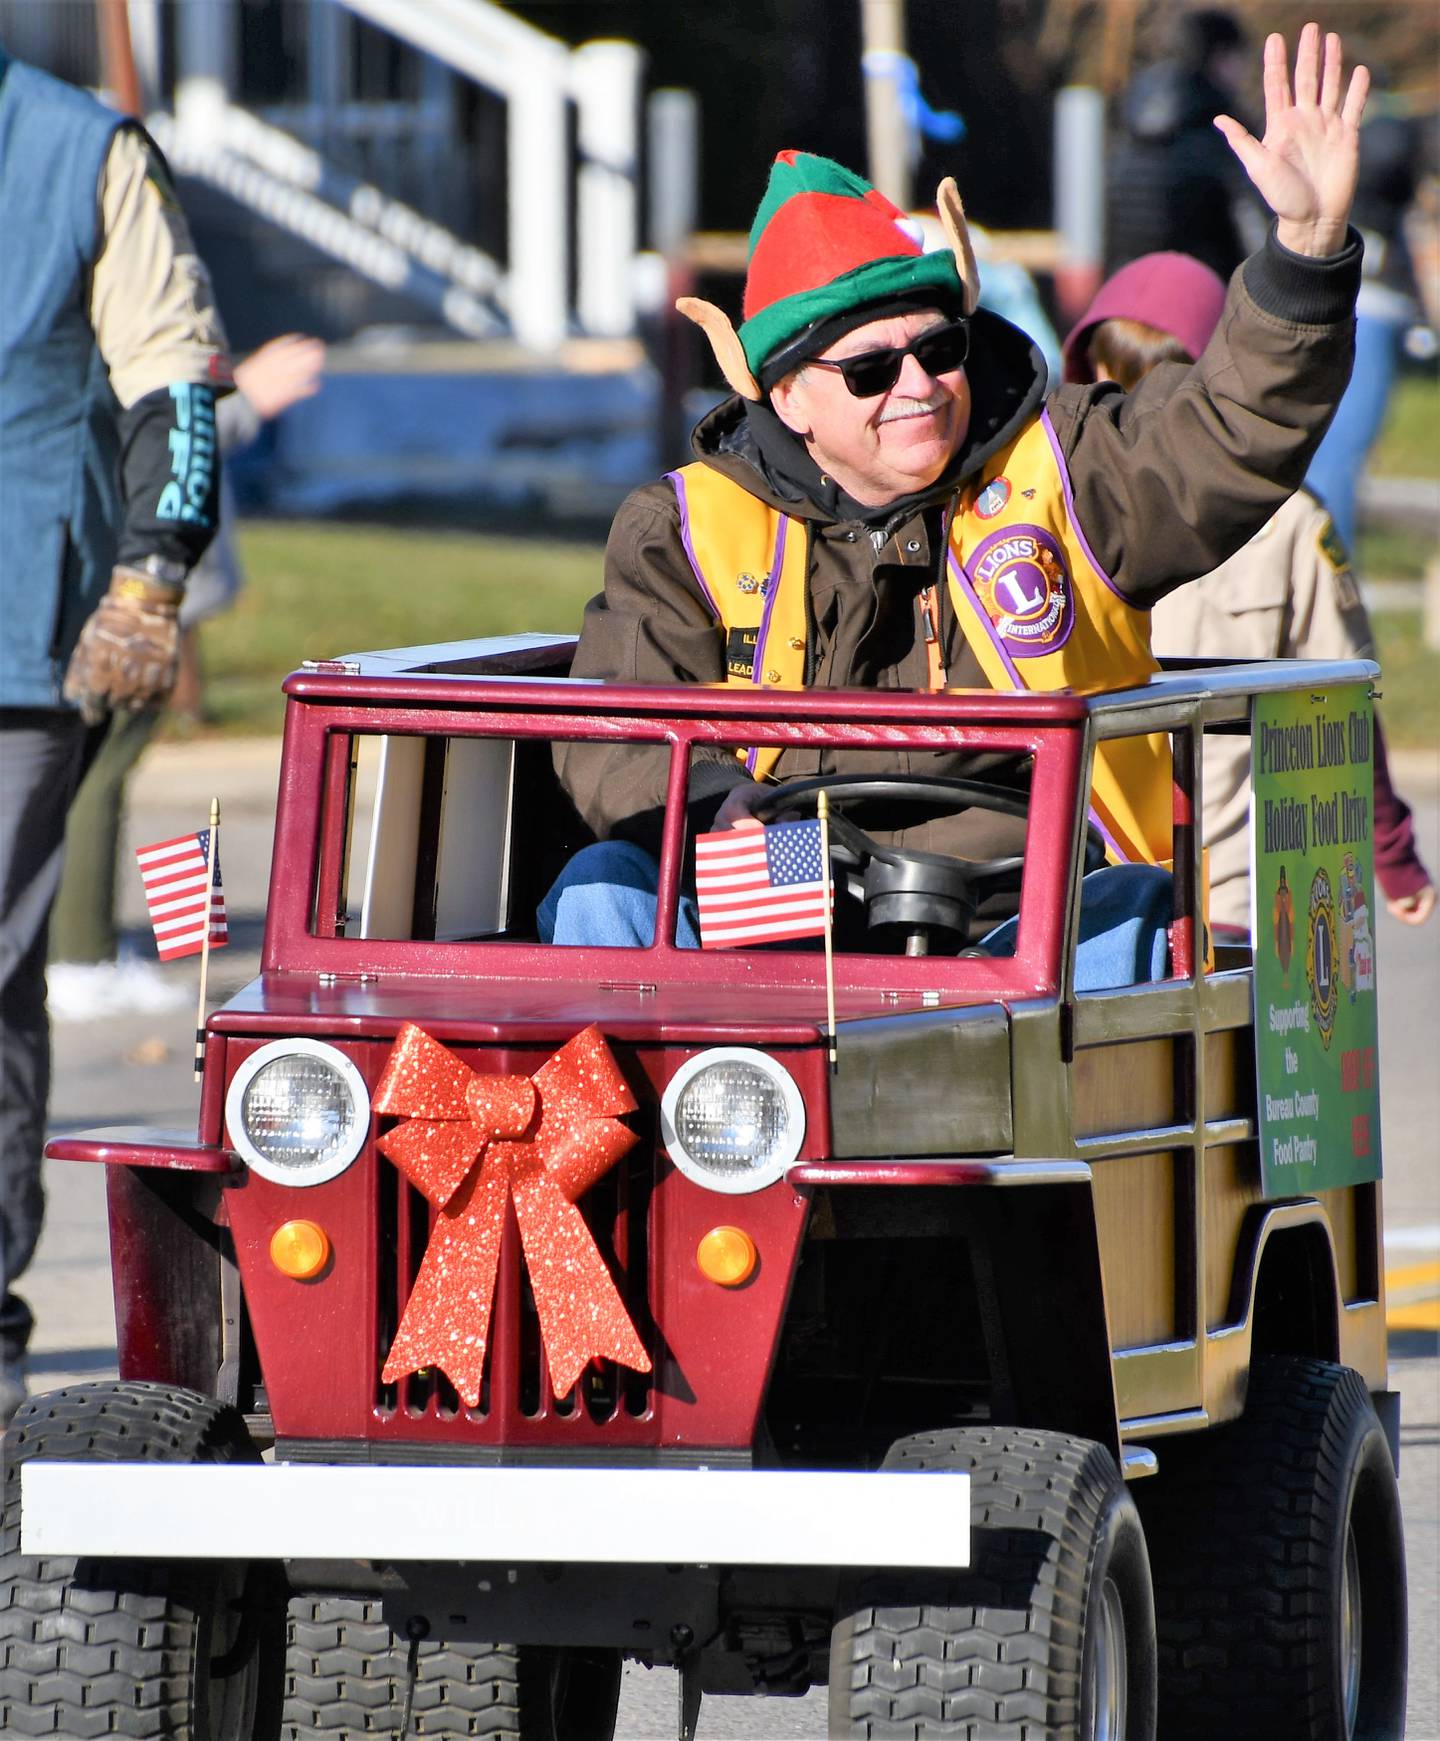 Scott Smith of the Princeton Lions Clubs leads the Christmas parade down Main Street in Princeton on Saturday.